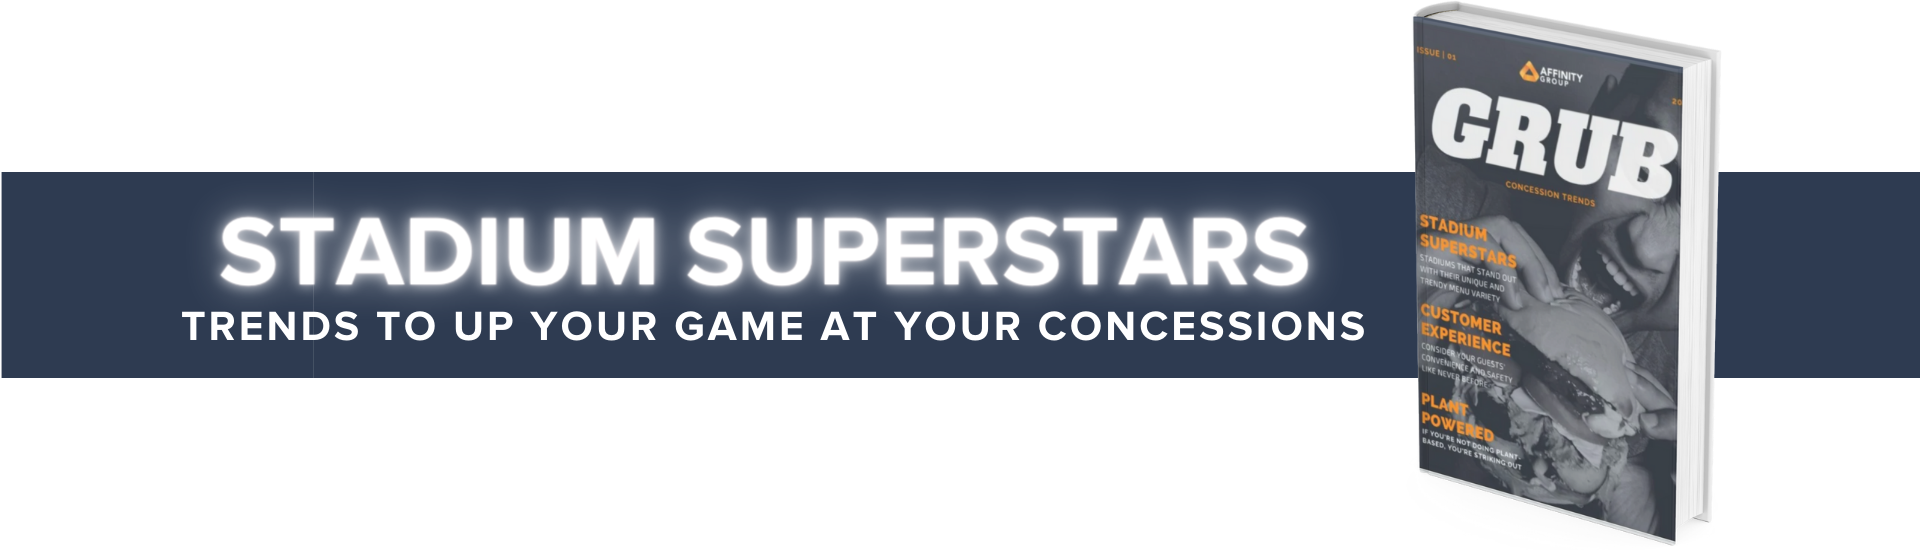 Game Day Eats Concessions Trends - Stadium Superstars